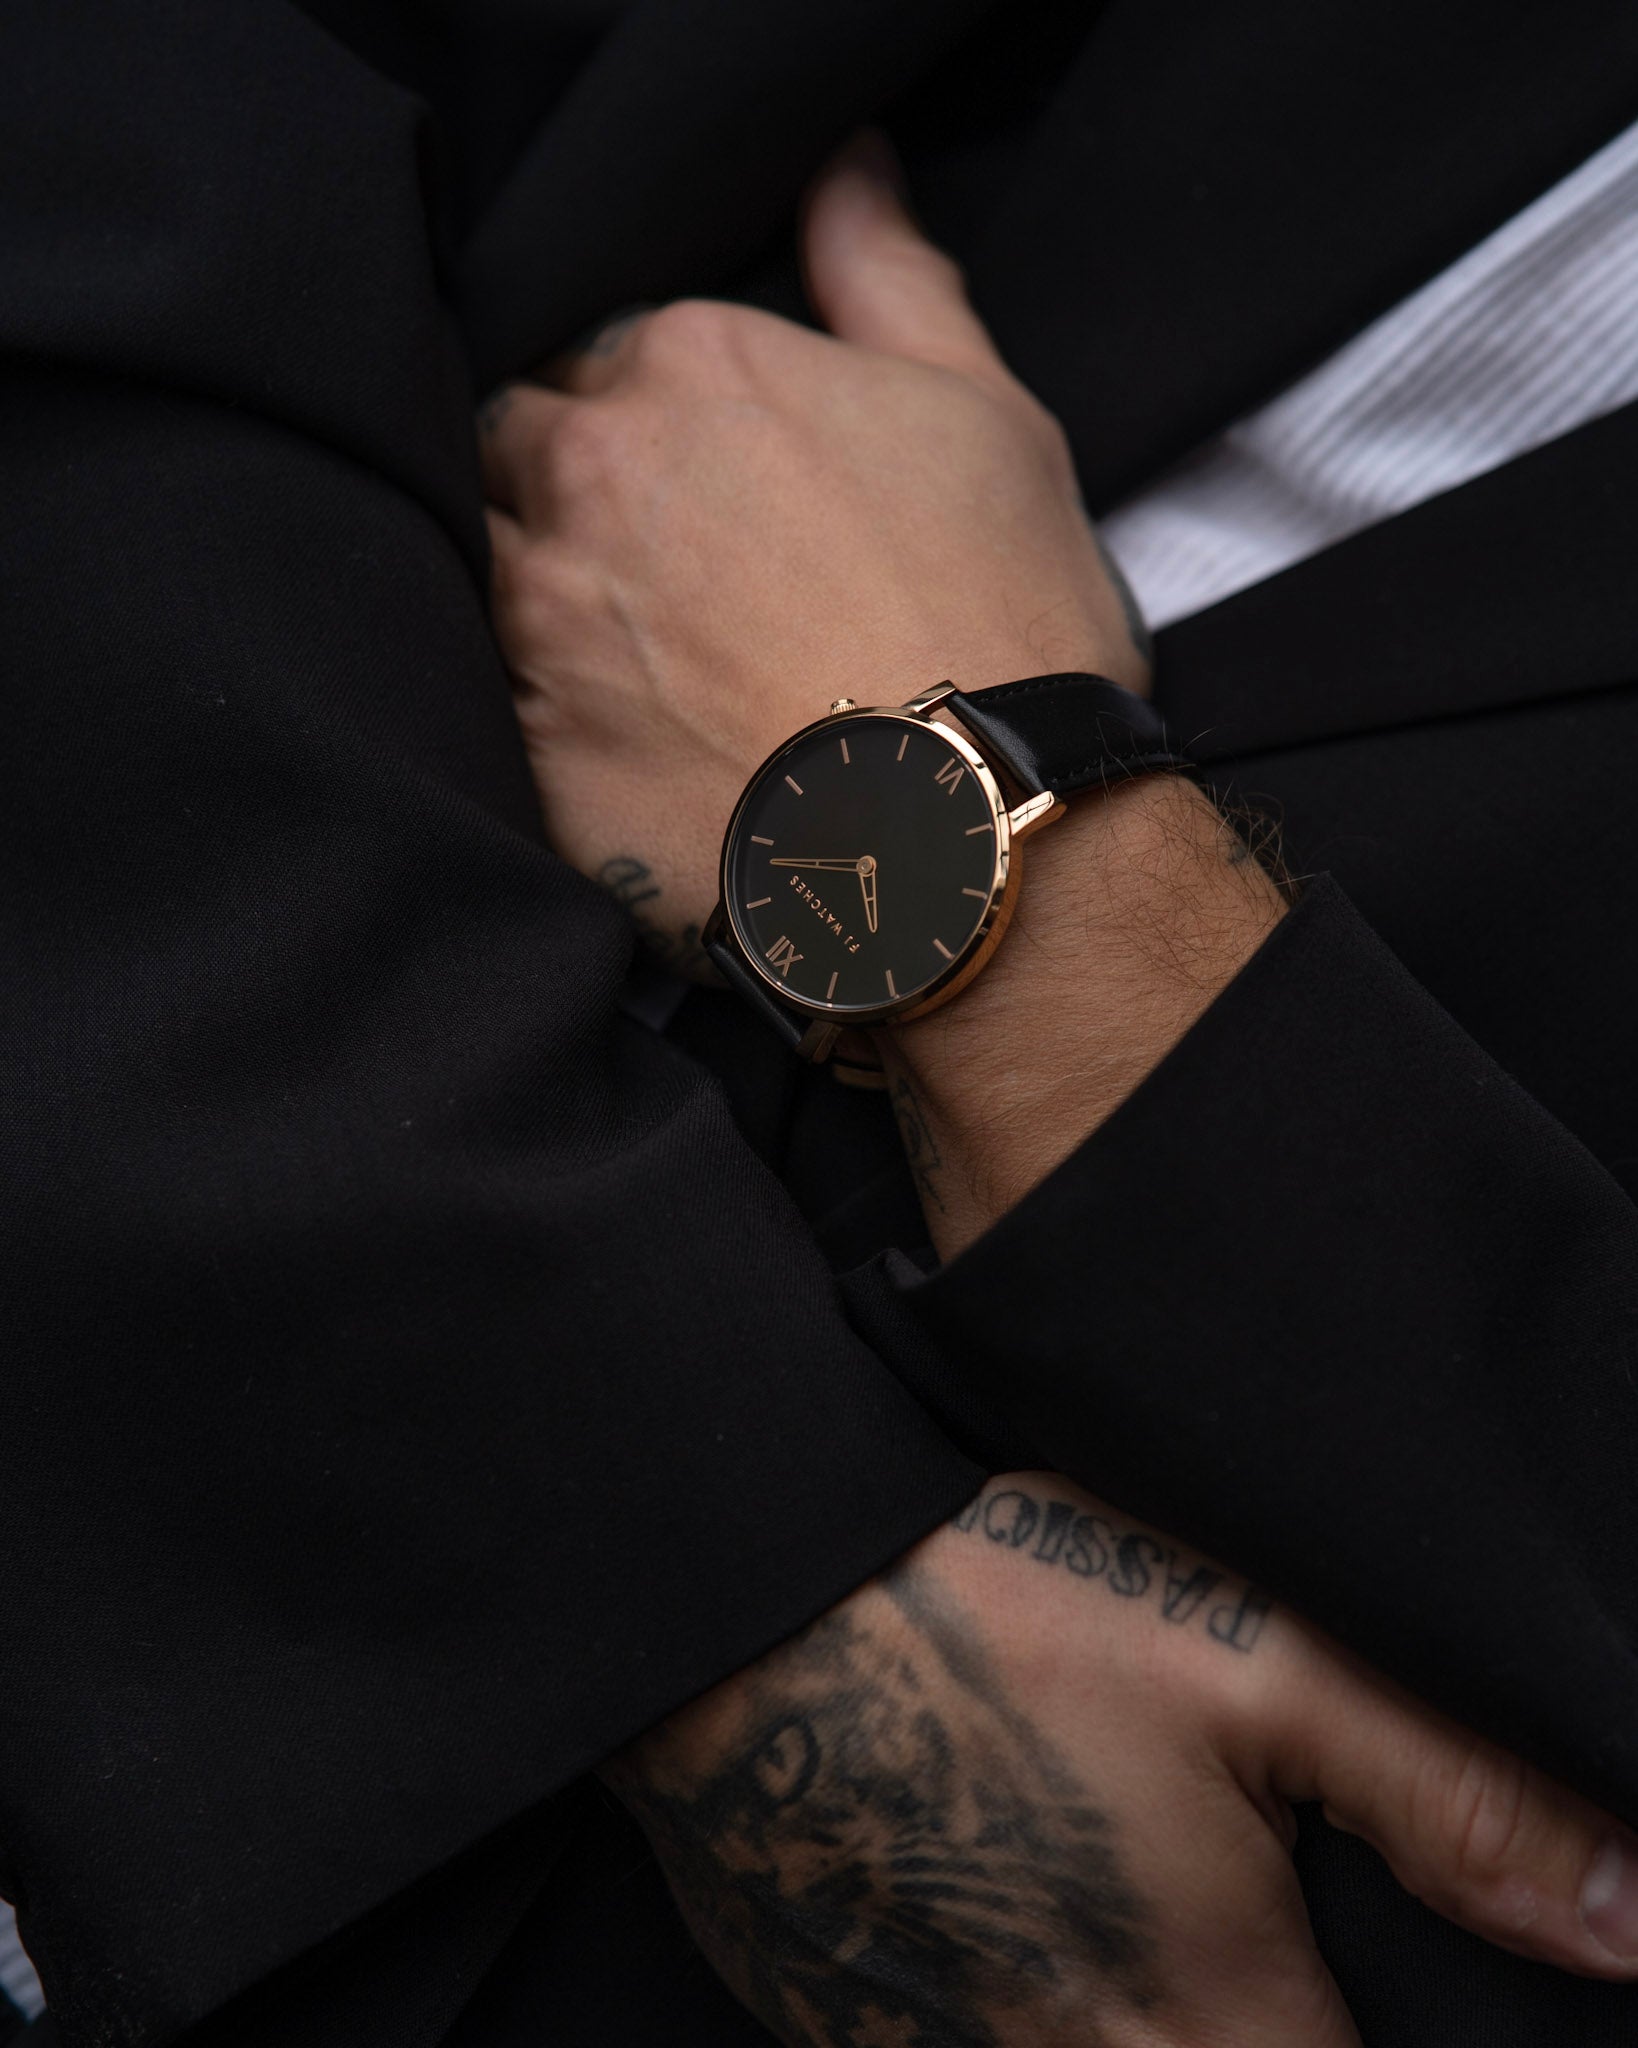 Discover Golden moon, a 42 mm men's watch from Five Jwlry with a black and rose gold dial. This one can be paired with a wide variety of leather colors, such as black, red, navy blue, gray, tan, brown and olive green!